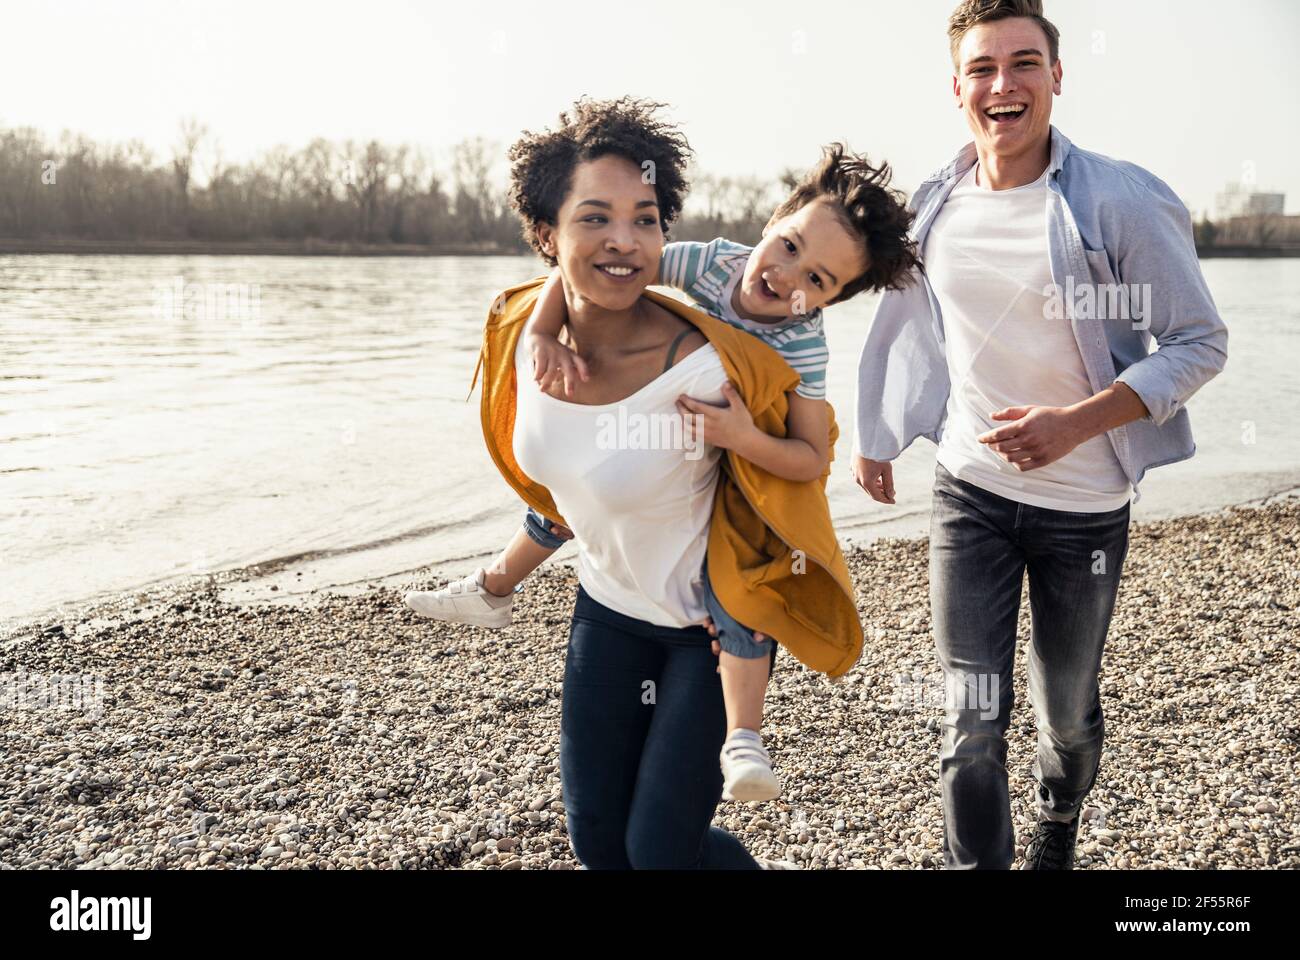 Young woman piggybacking boy while running by lakeshore Stock Photo